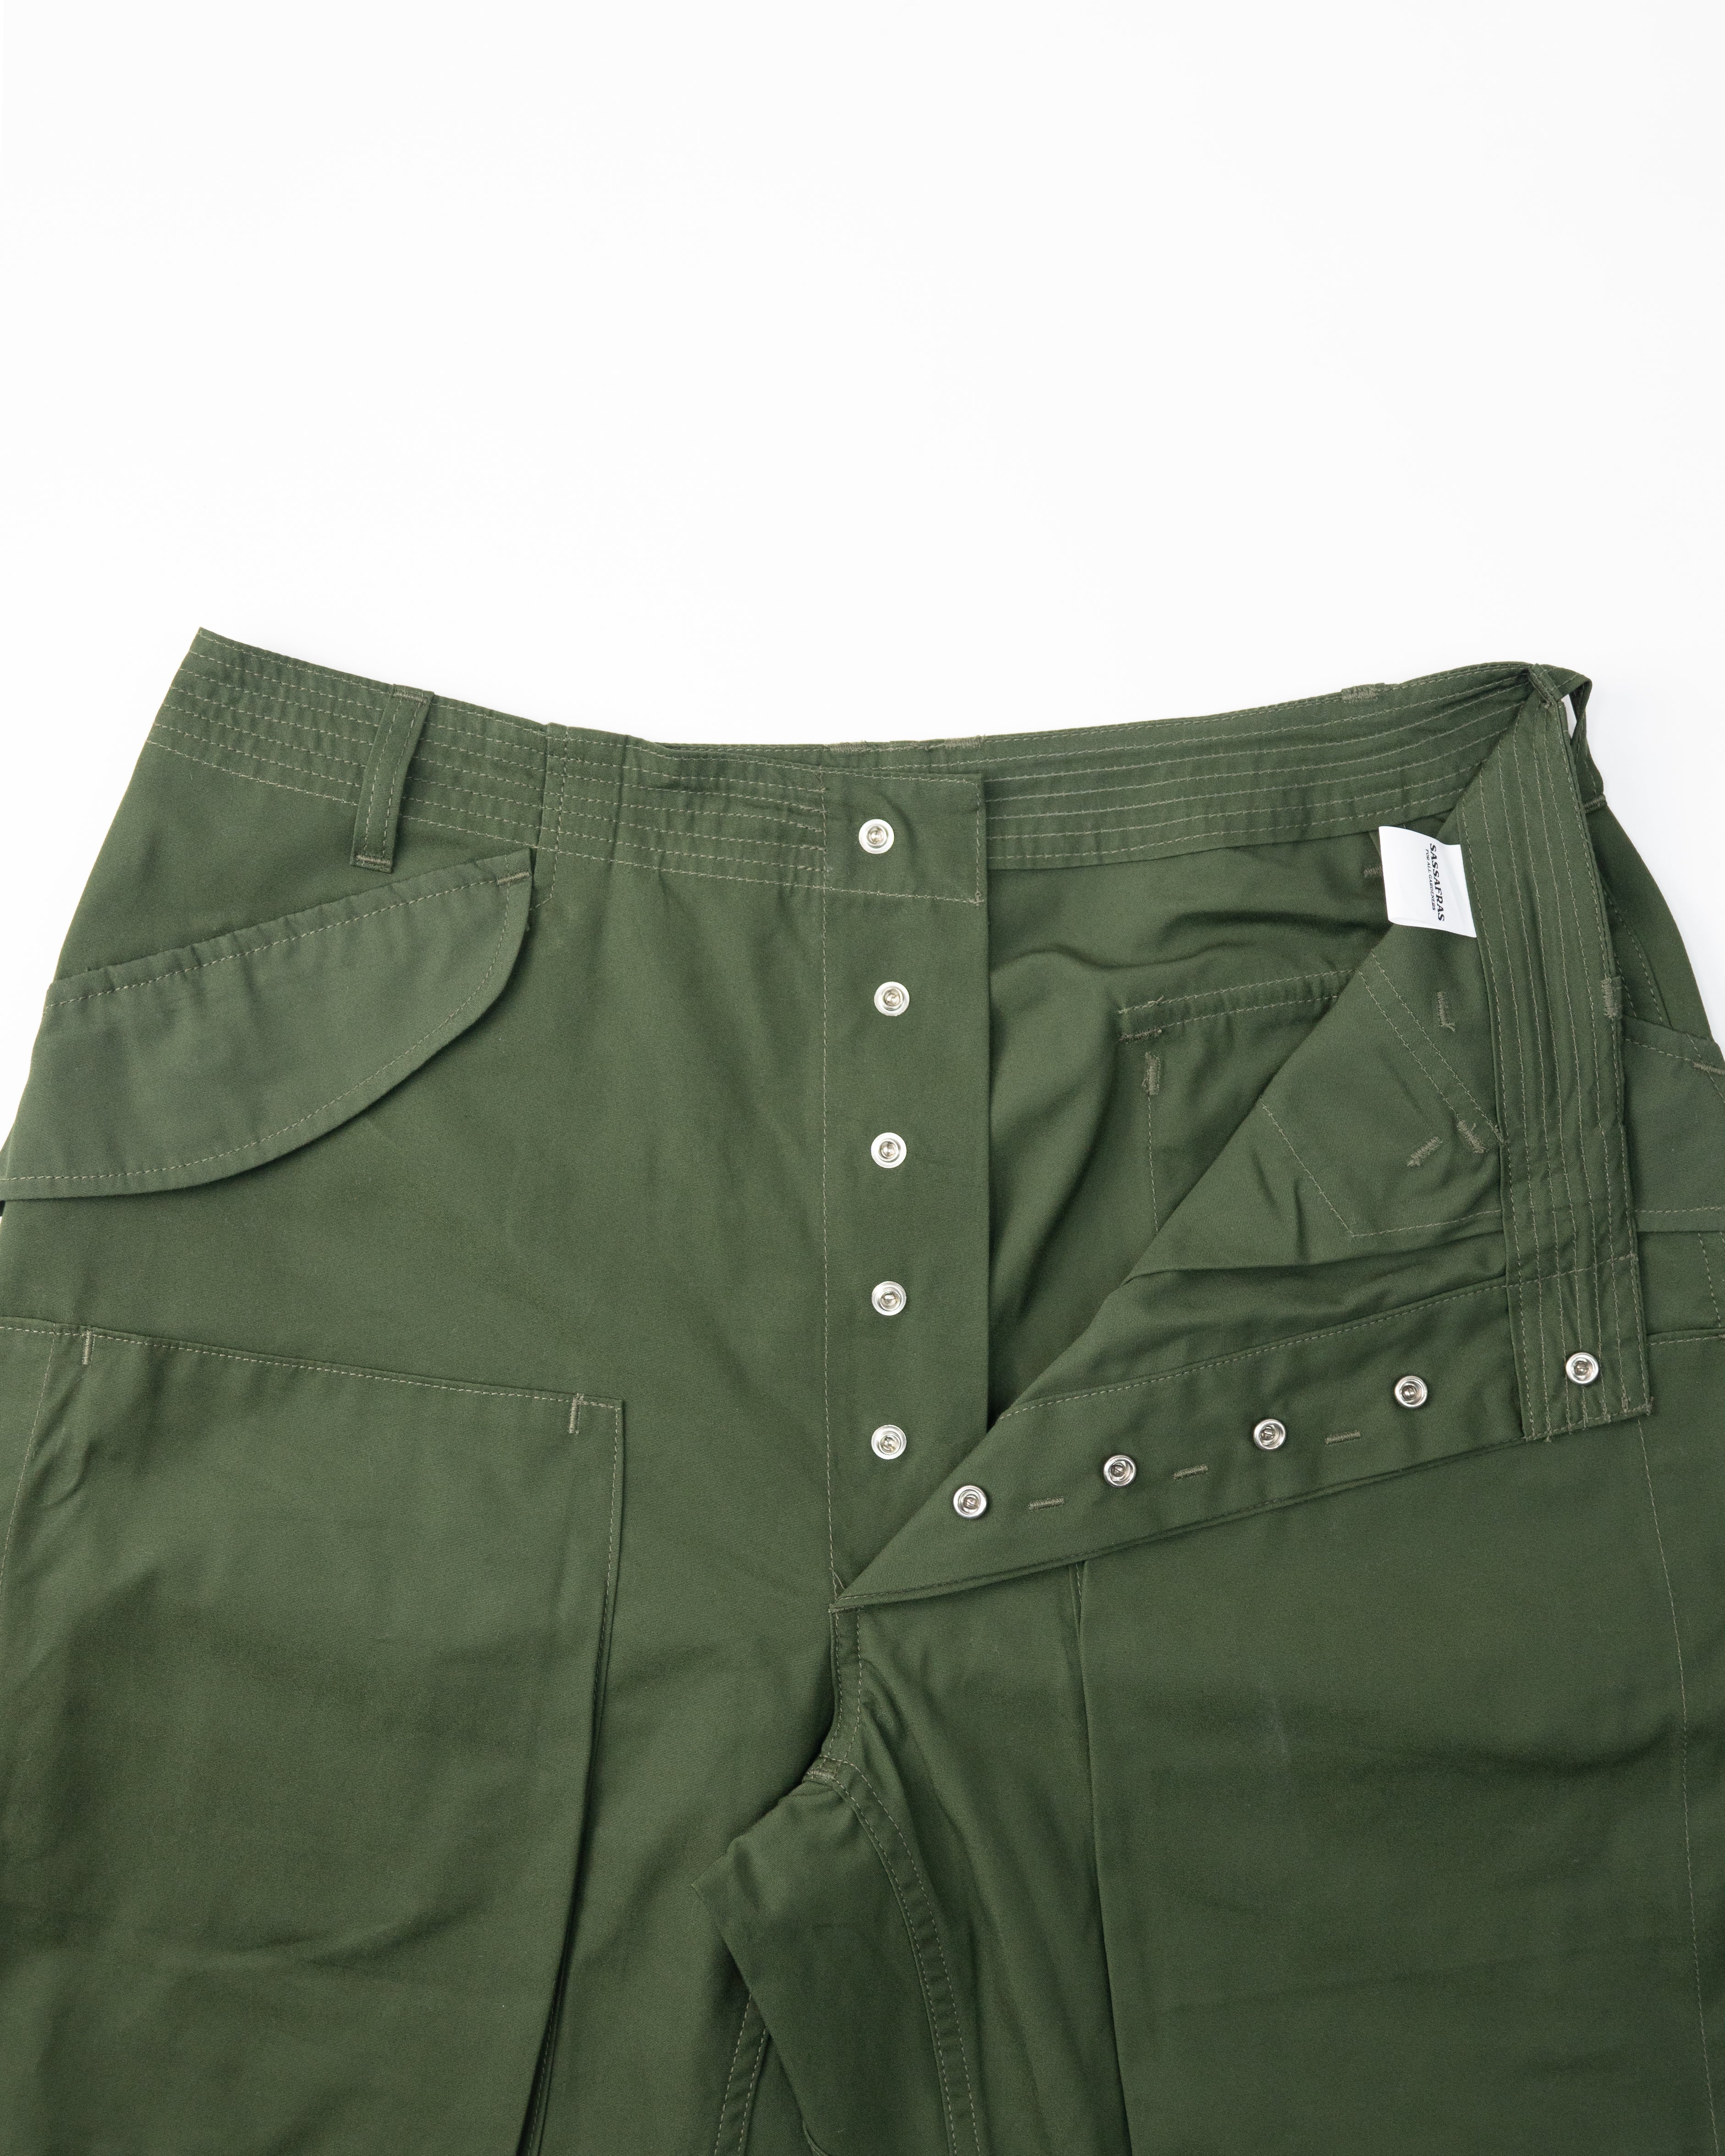 D/C Armor Shorts SF-232027 | Olive